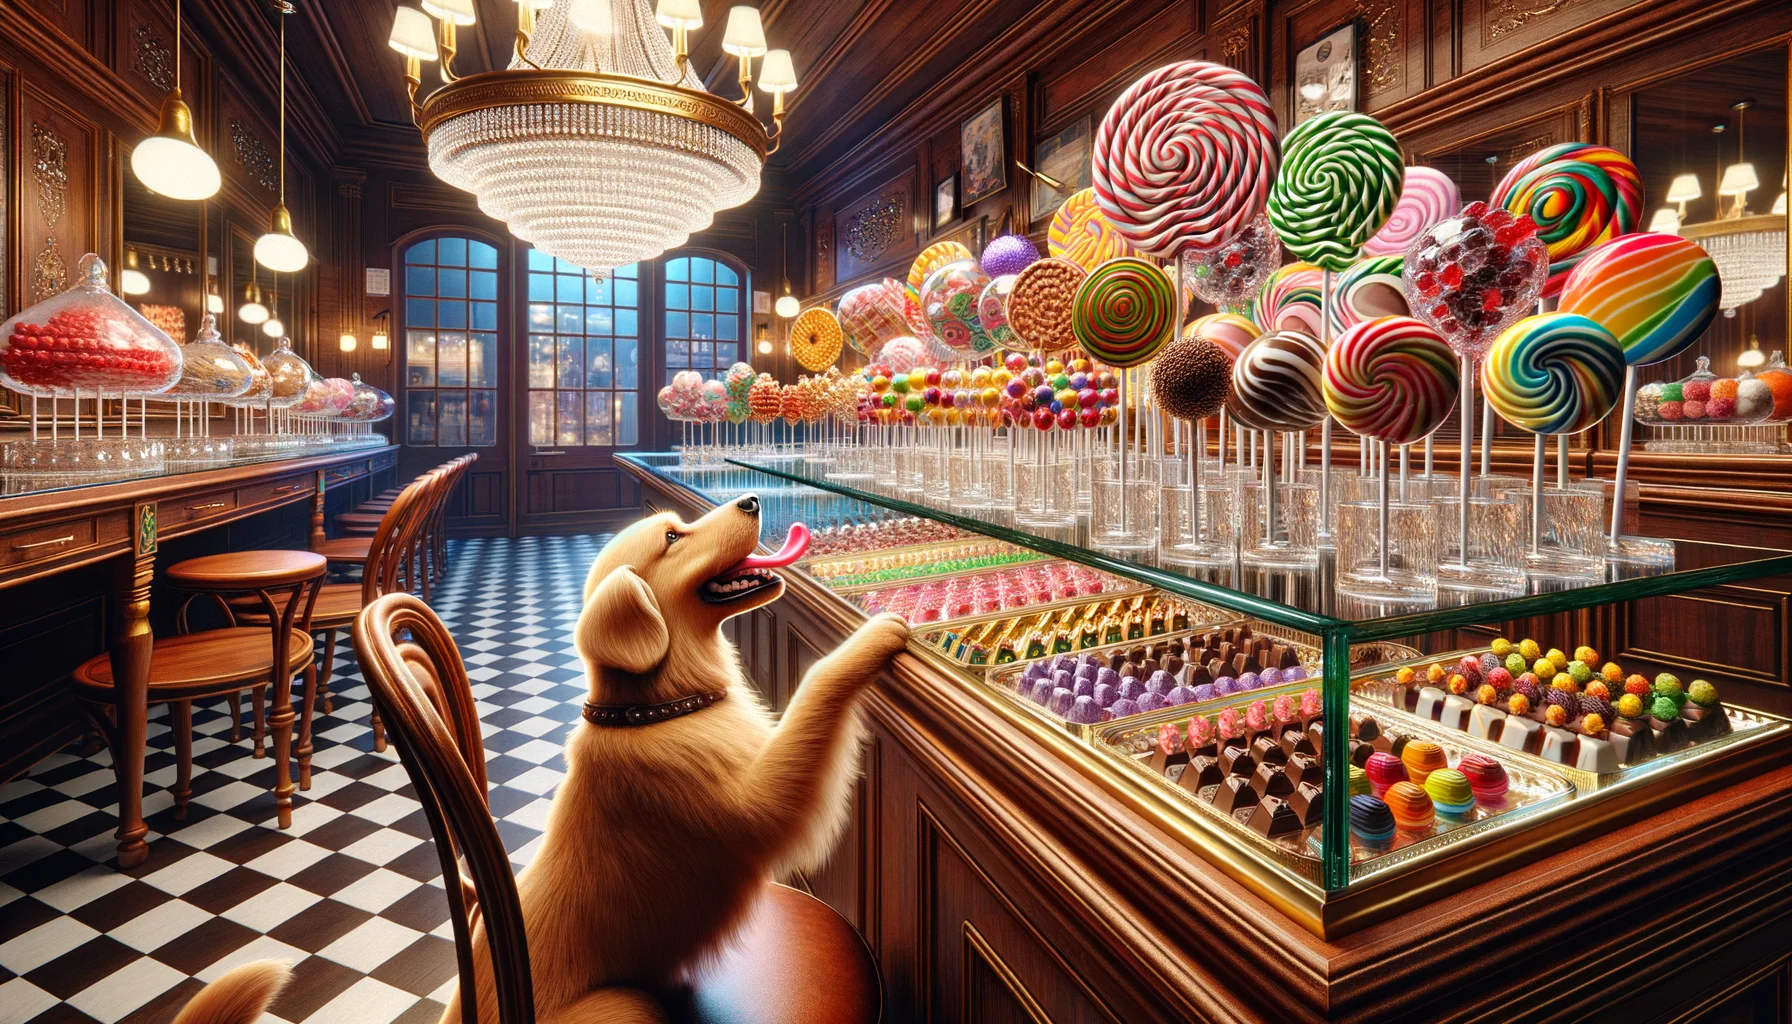 Create an amusing and lifelike image that depicts high-quality 'Gourmet Candy' in an ideal situation. The image scene ought to pan out in a luxurious candy shop displaying various types of gourmet candy artfully arranged on crystal display trays. There are candies of all sorts: sugary lollipops with stripe patterns, glossy bonbons in vibrant colours, intricate chocolates with elaborate designs and delicate candy floss spirals which seem to float in the air. A laughable element can be introduced by showing a golden retriever dog trying to reach for a lollipop on the counter, its tongue lolling out comically. Chairs and tables in the shop are beautifully crafted from mahogany wood providing a dignified contrast to the colorful candies. The light fixture is a sparkling chandelier casting reflective light on the array of candies creating a magical atmosphere. EDIT: Everything is richly detailed and hyper realistic, including the wood grain on the furniture, shine on the chandelier and the glossy finish on the candies.